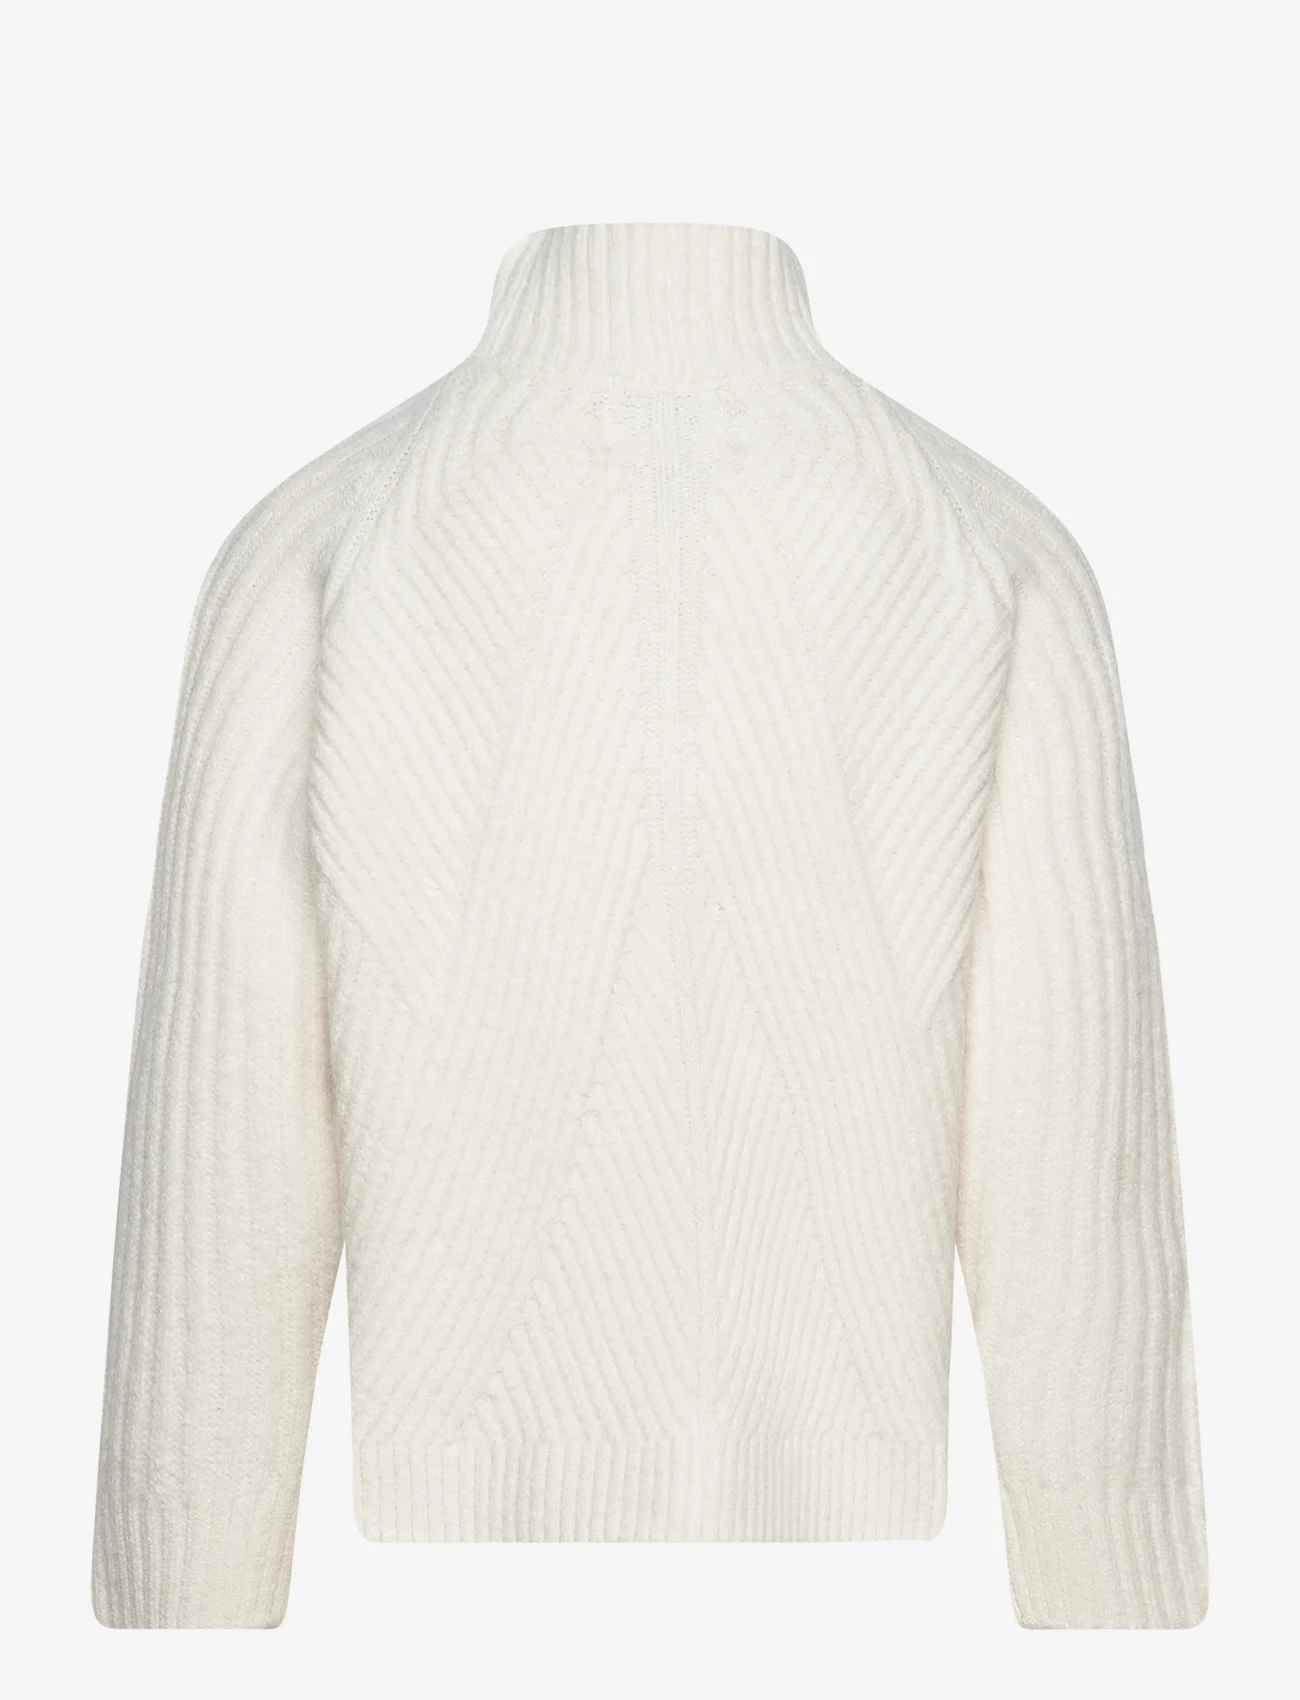 Sofie Schnoor Young - Sweater - džemperiai - off white - 1